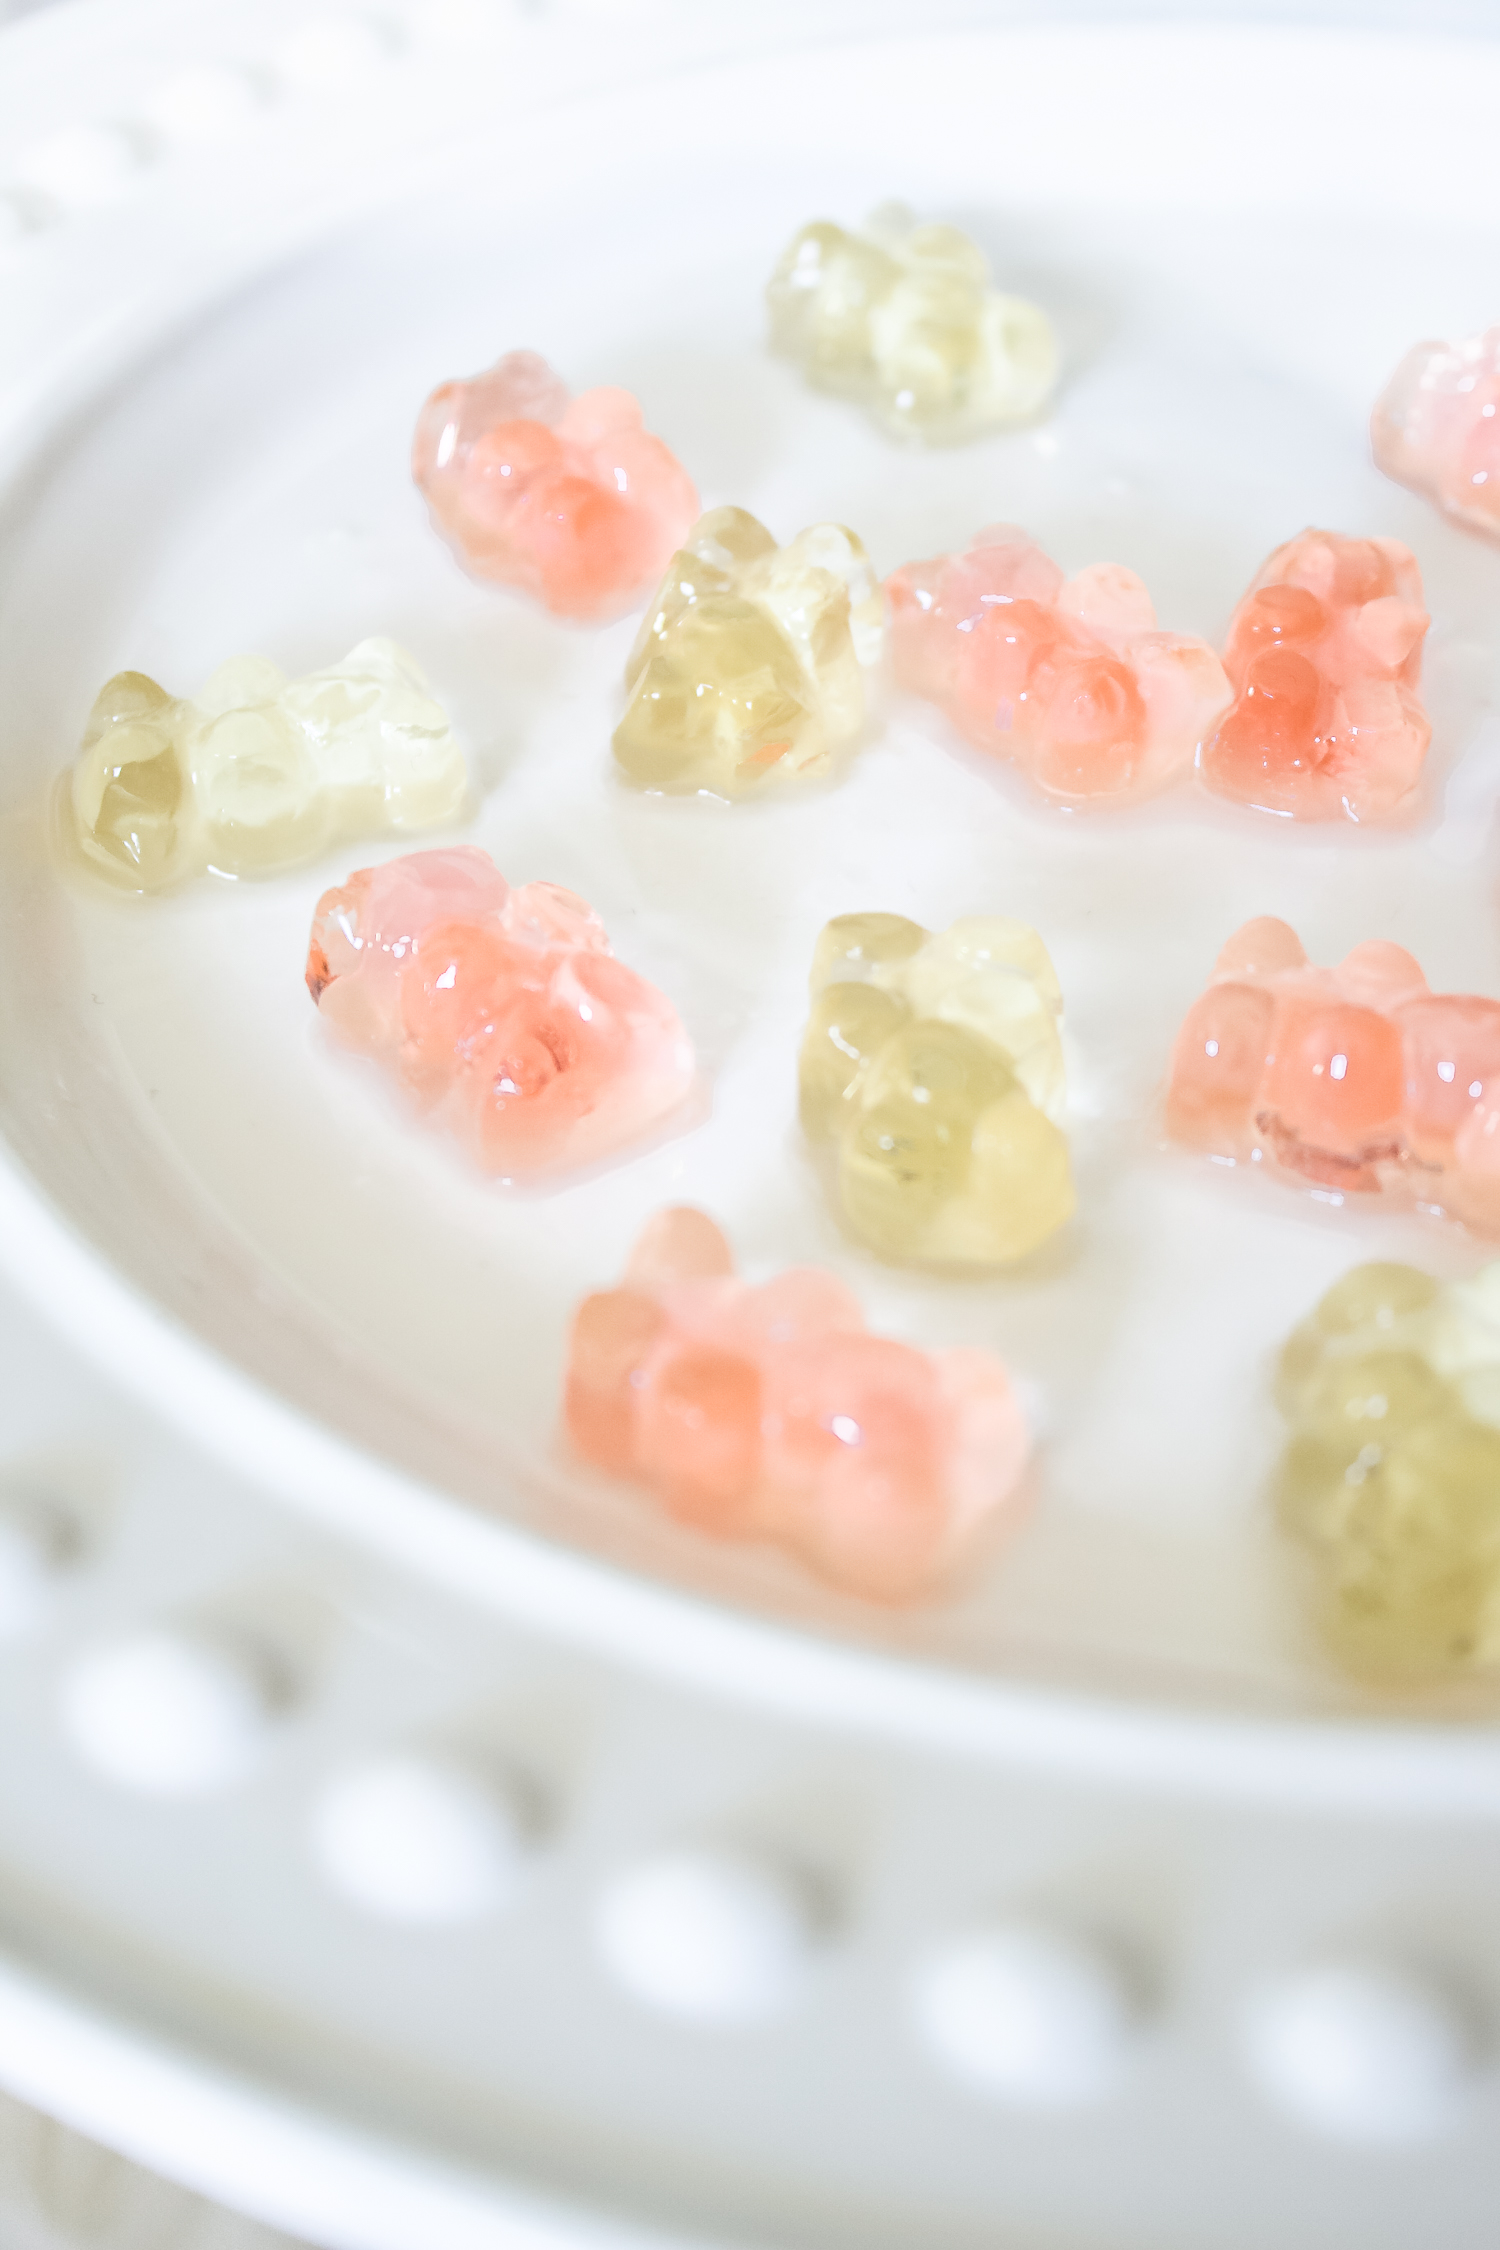 How to make champagne gummy bears by southern lifestyle blogger Stephanie Ziajka from Diary of a Debutante, easy champagne soaked gummy bears recipe using Sugarfina Champagne Bears Gummy Candy